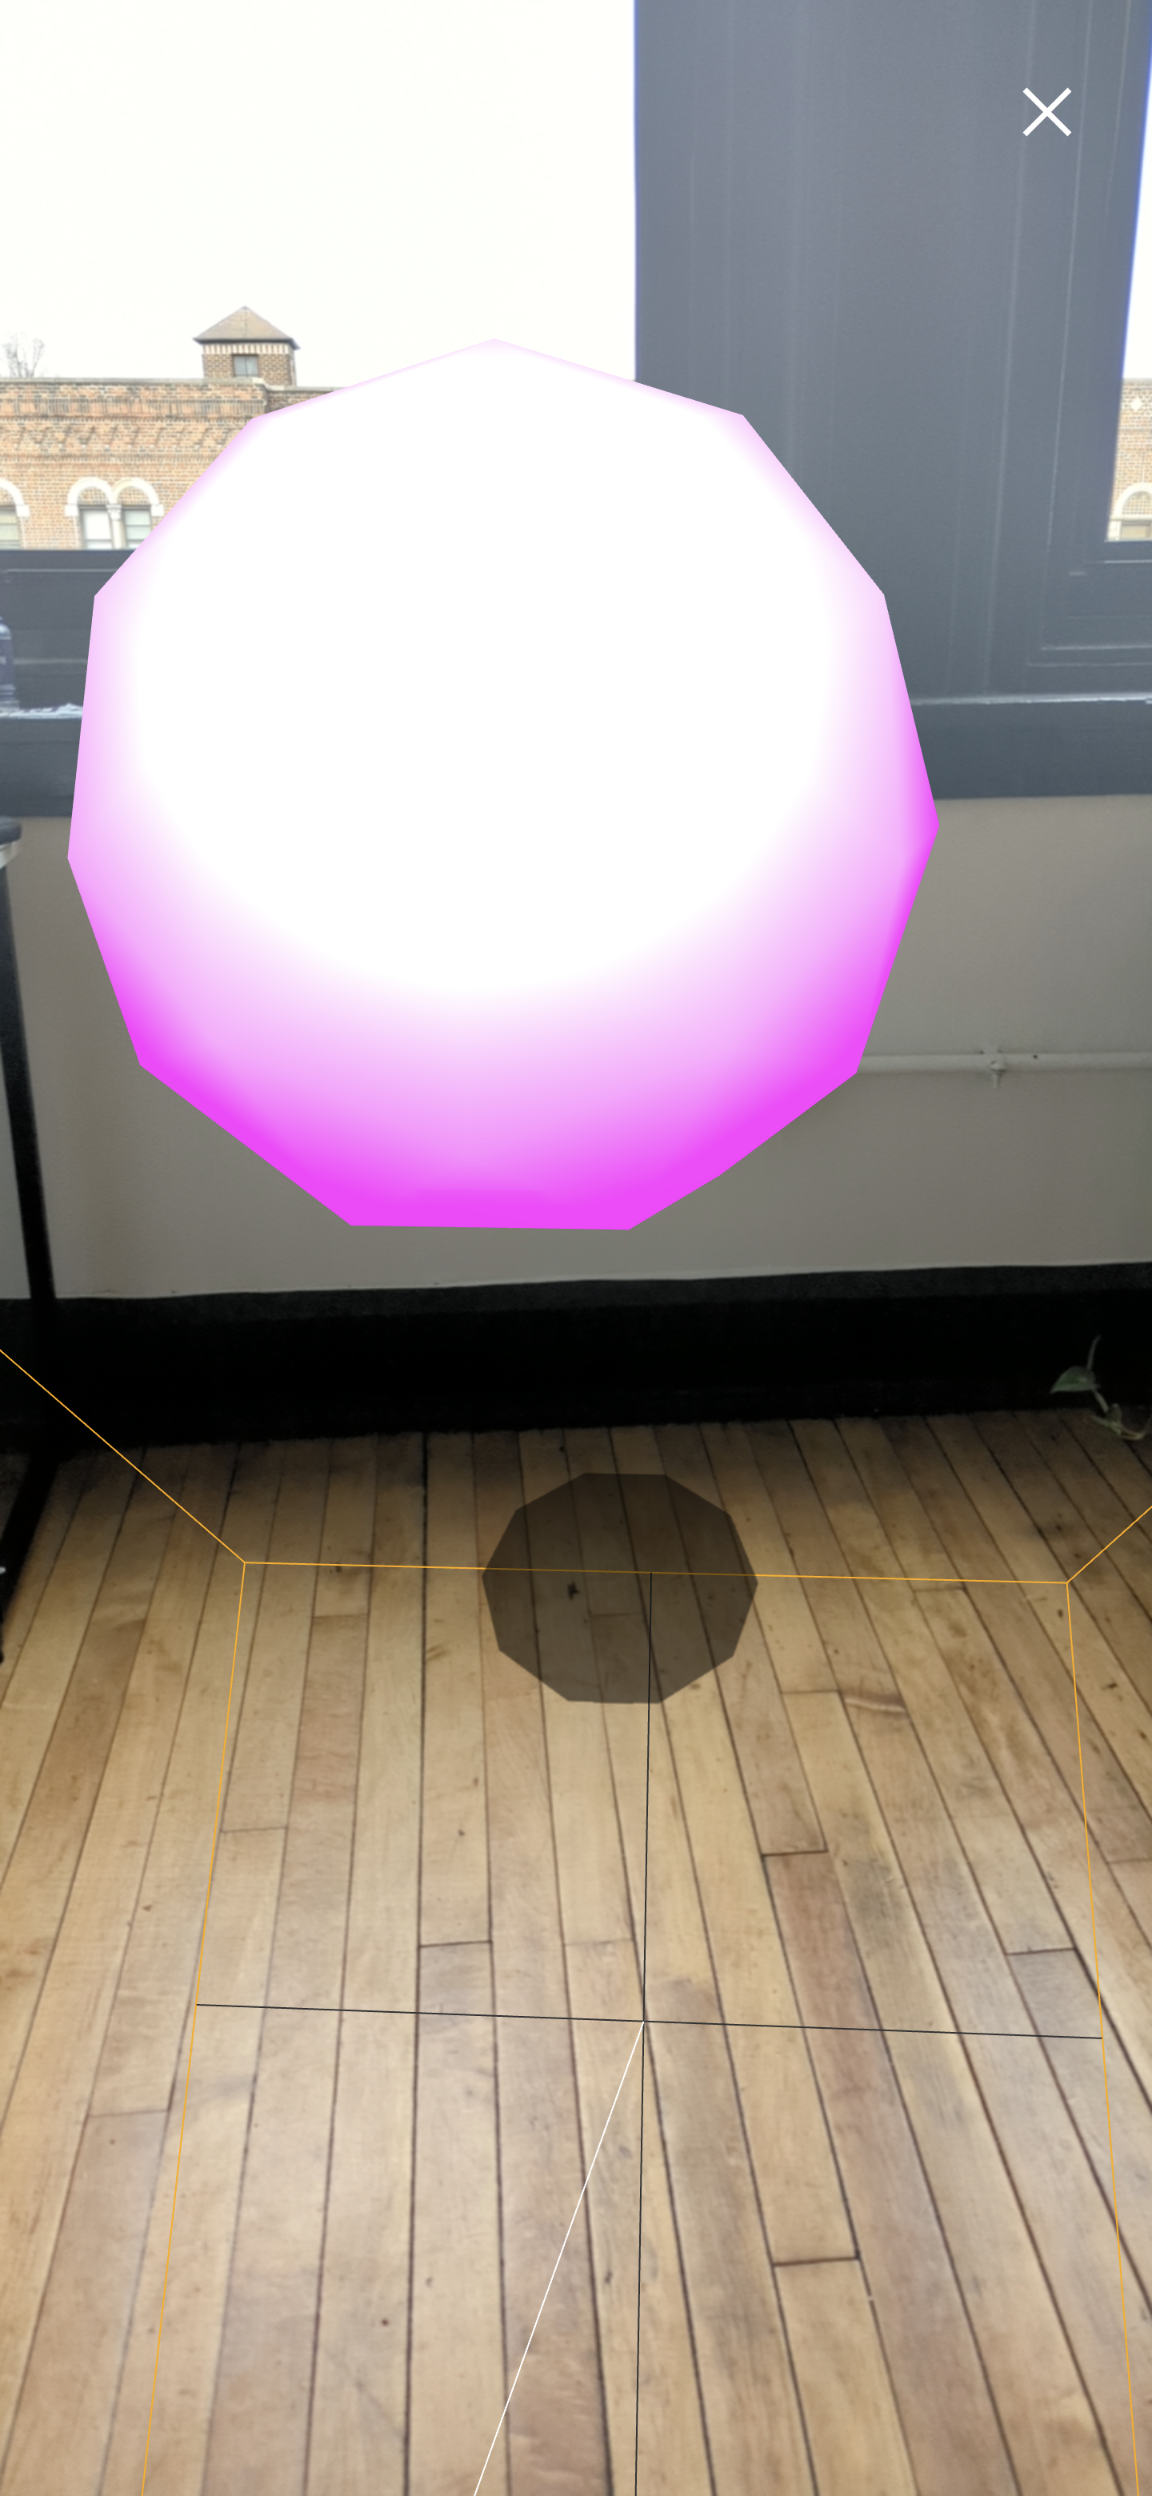 showing a shadow of a virtual object